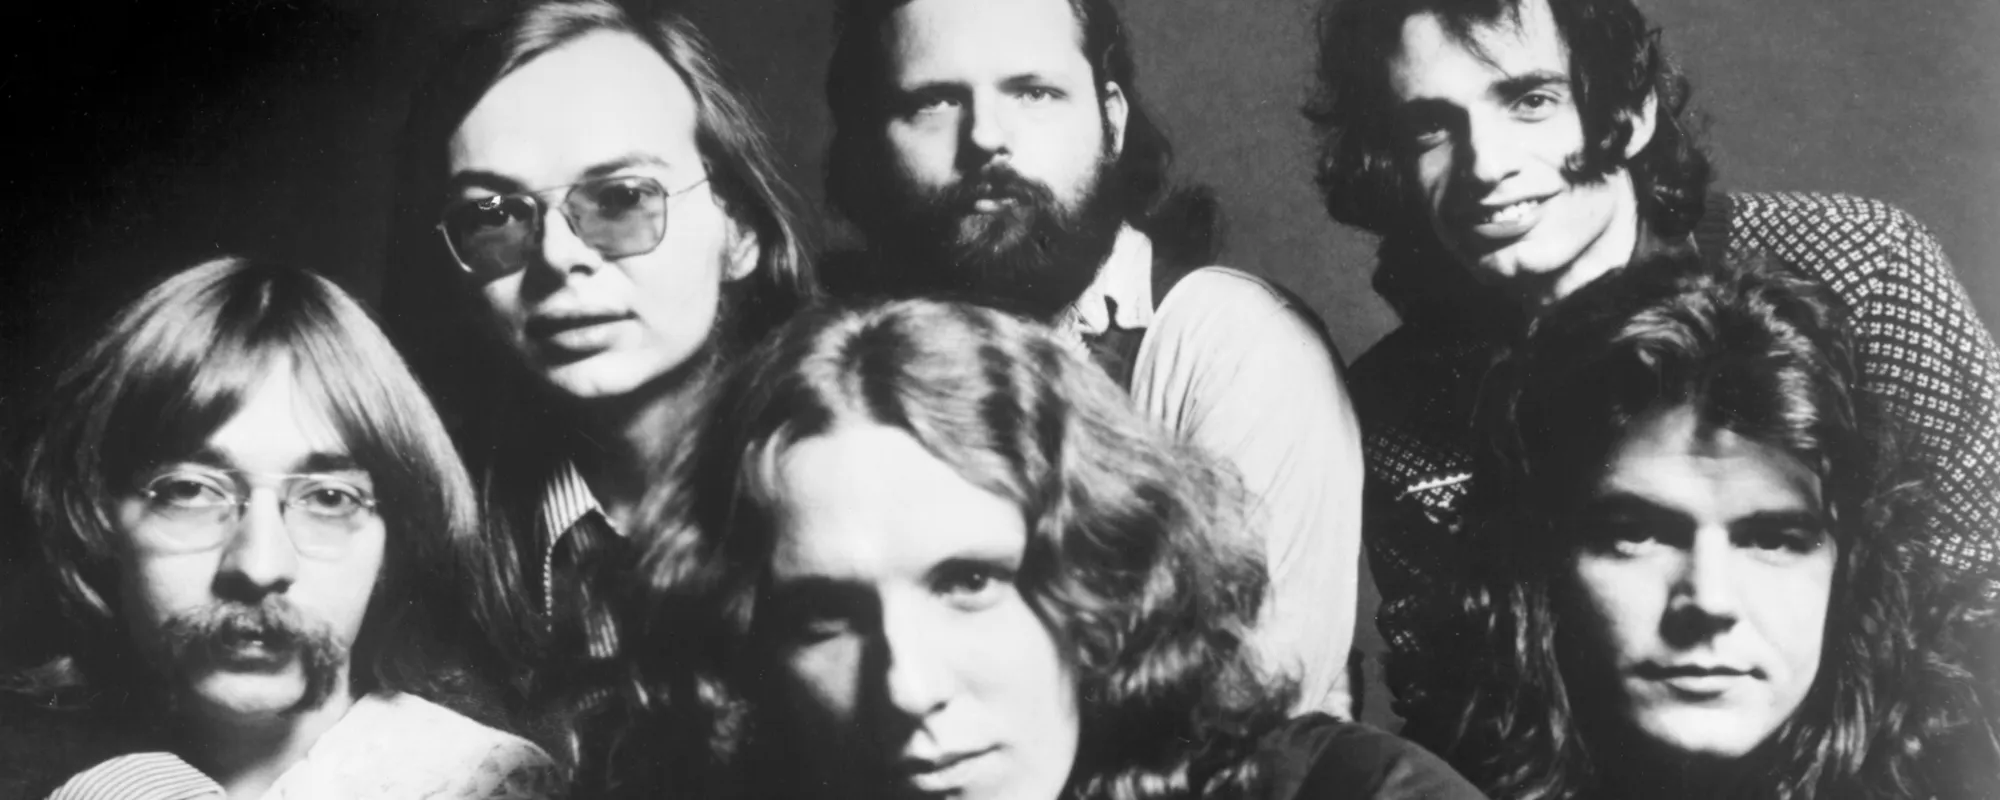 Behind the Meaning of the Band Name: Steely Dan